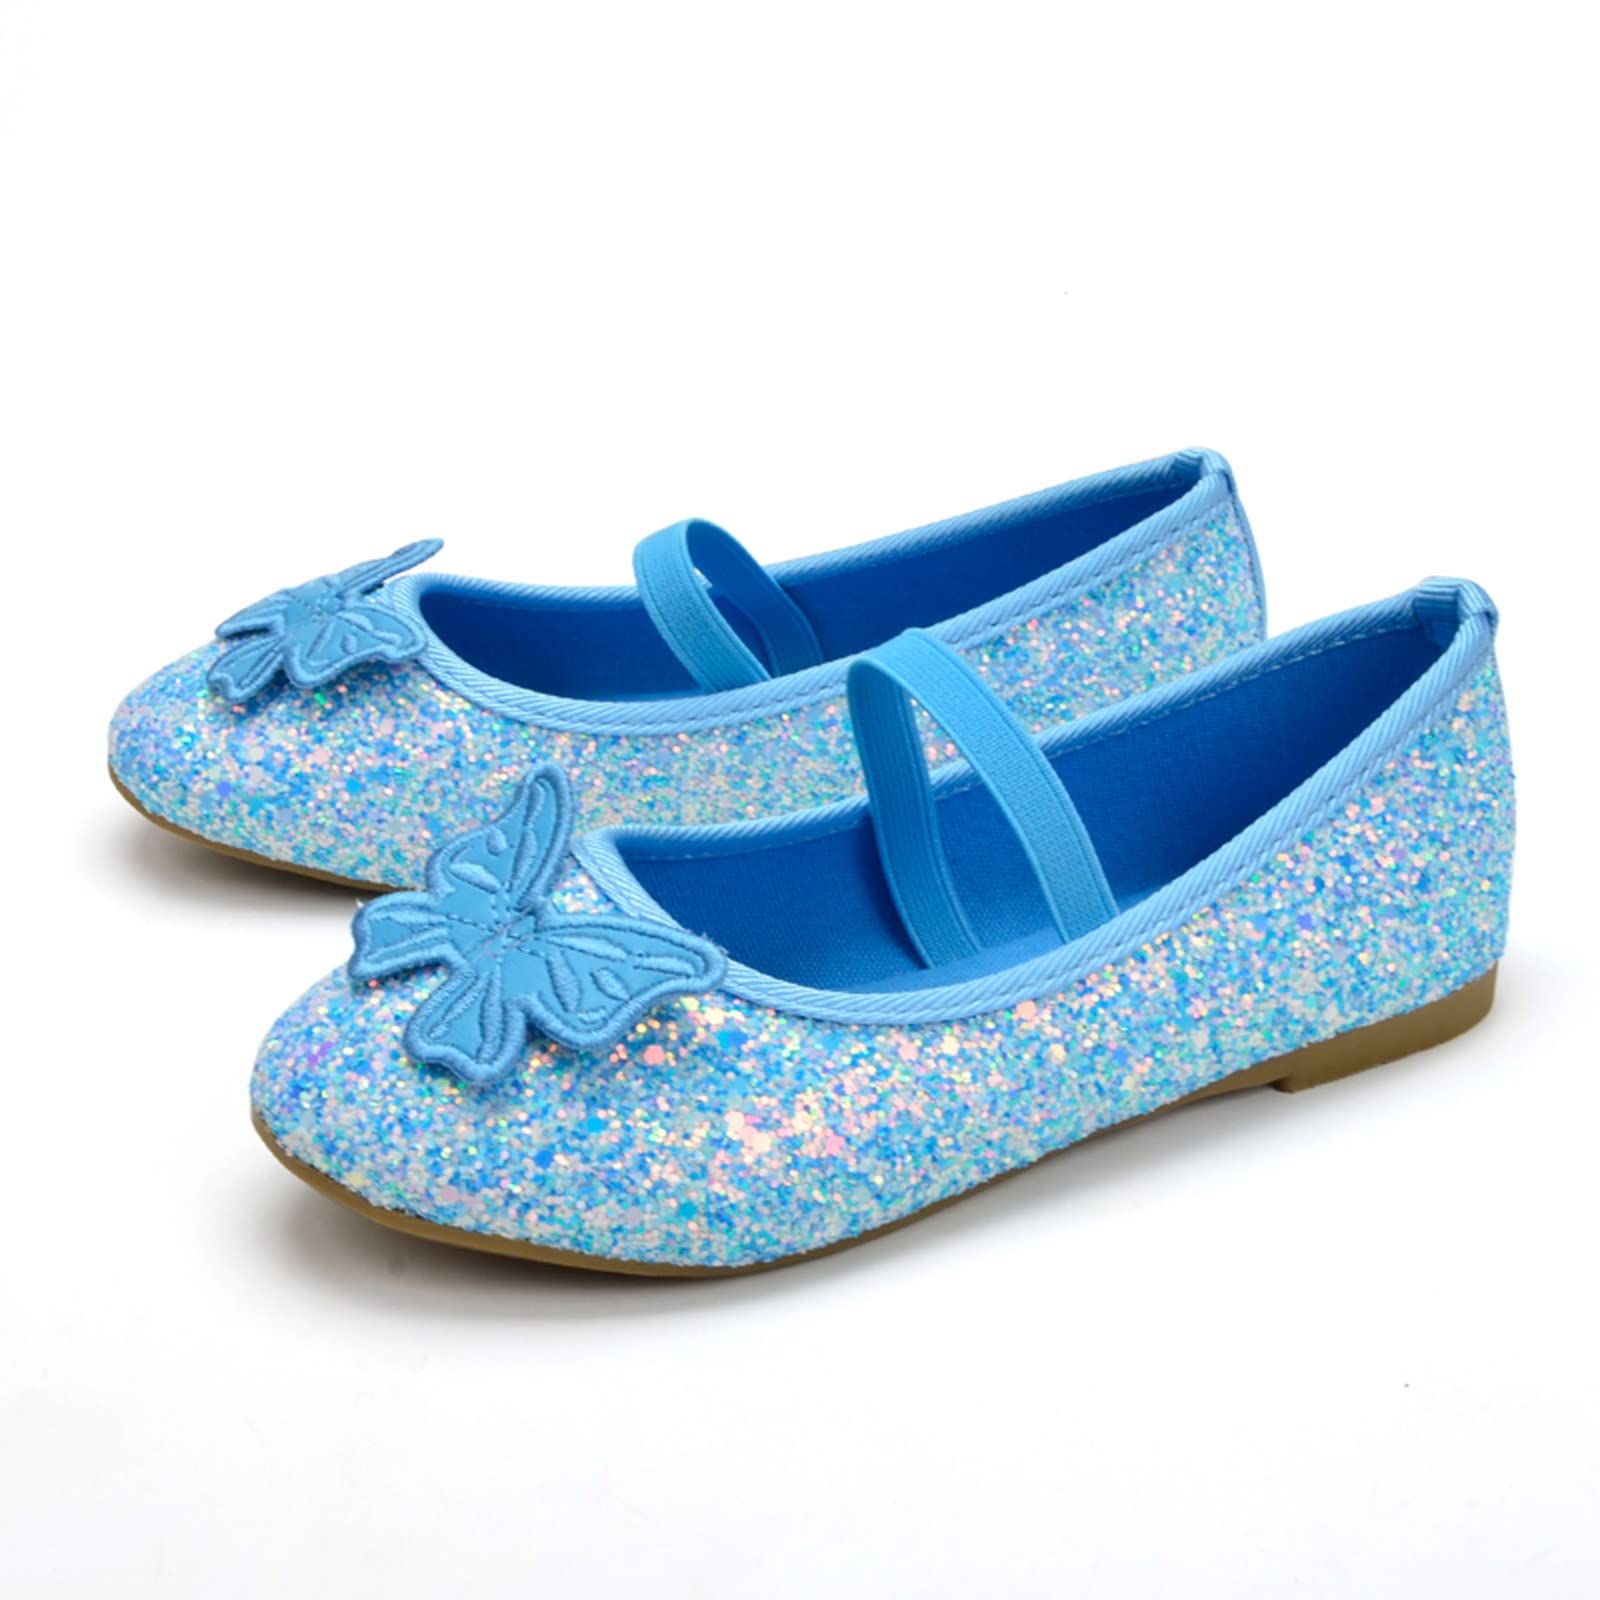 TODOZO Children Shoes Flat Shoes Crystal Shoes with Sequins Bowknot Girls Dancing Shoes Little Girls Shoes Size 11